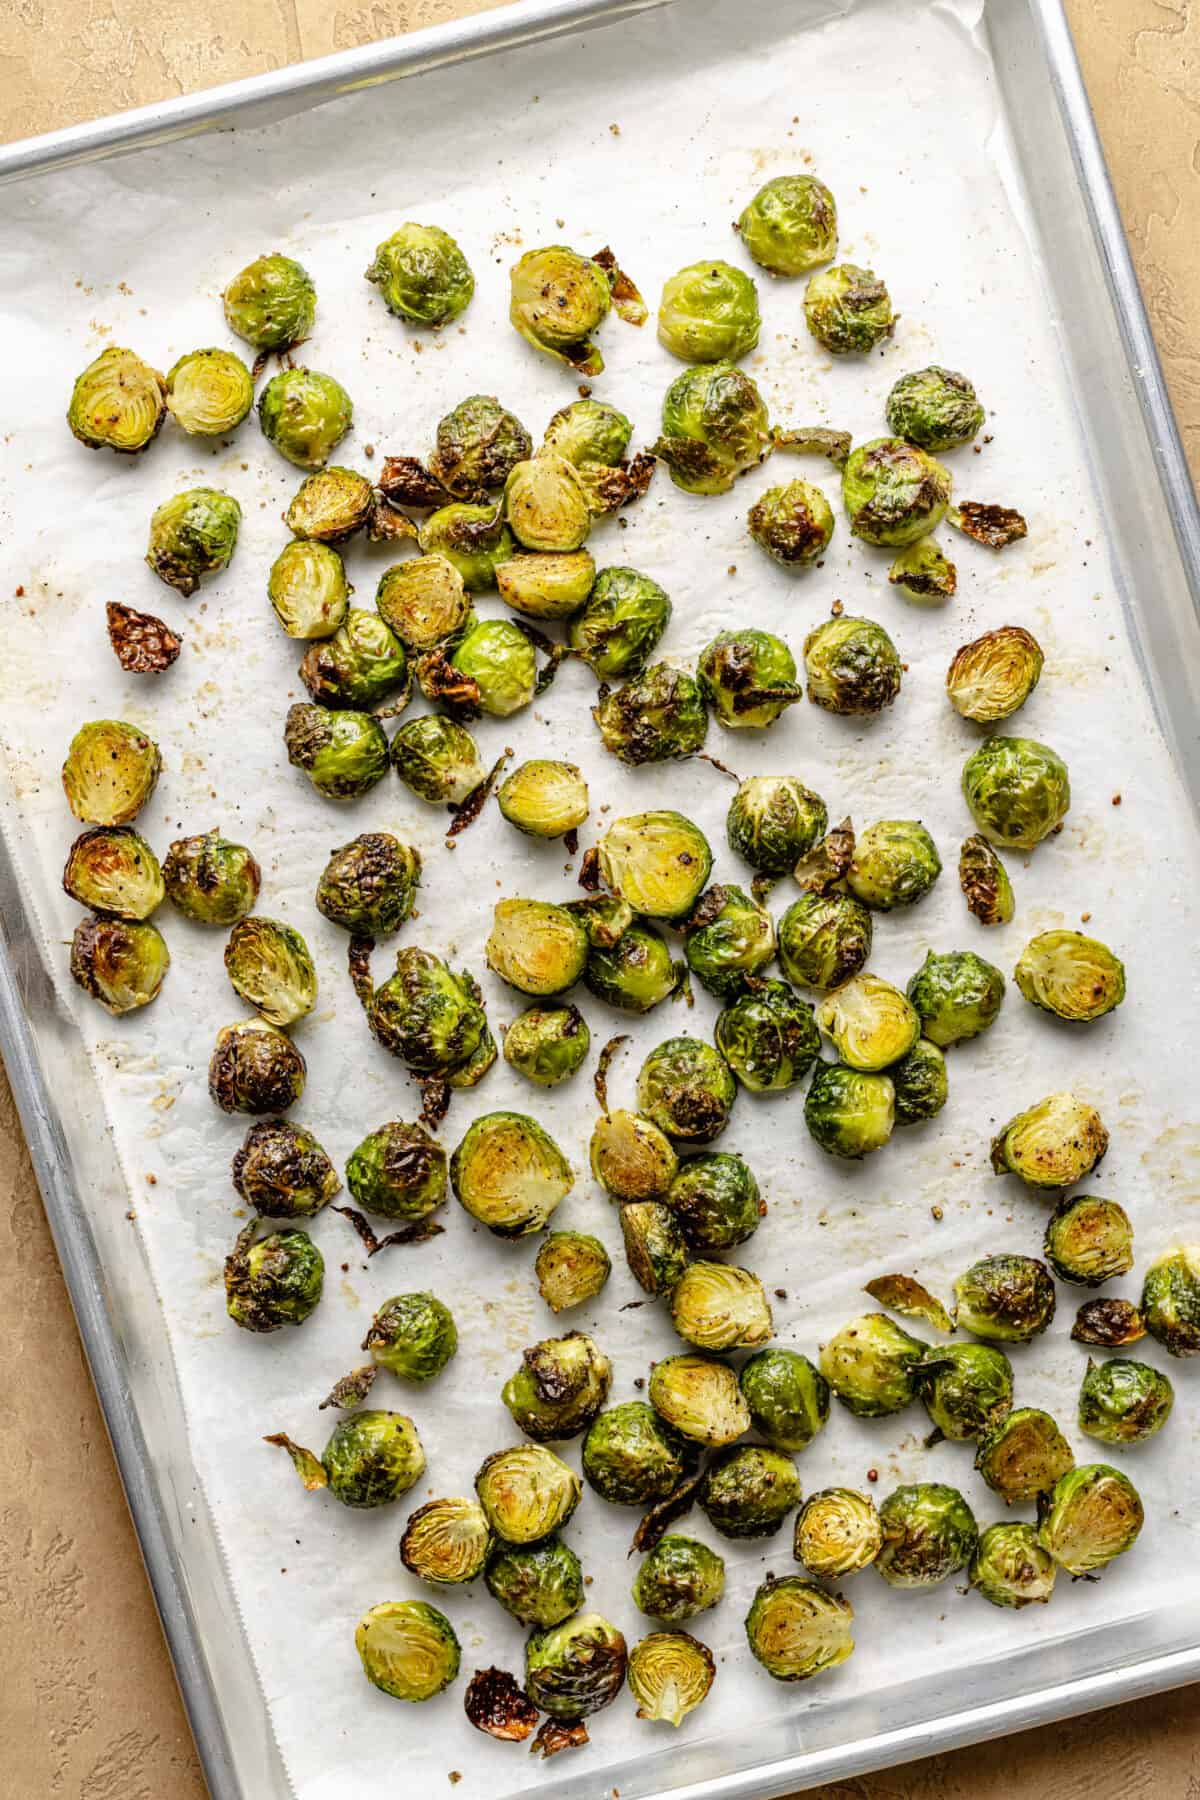 Roasted brussels sprouts on sheet pan.